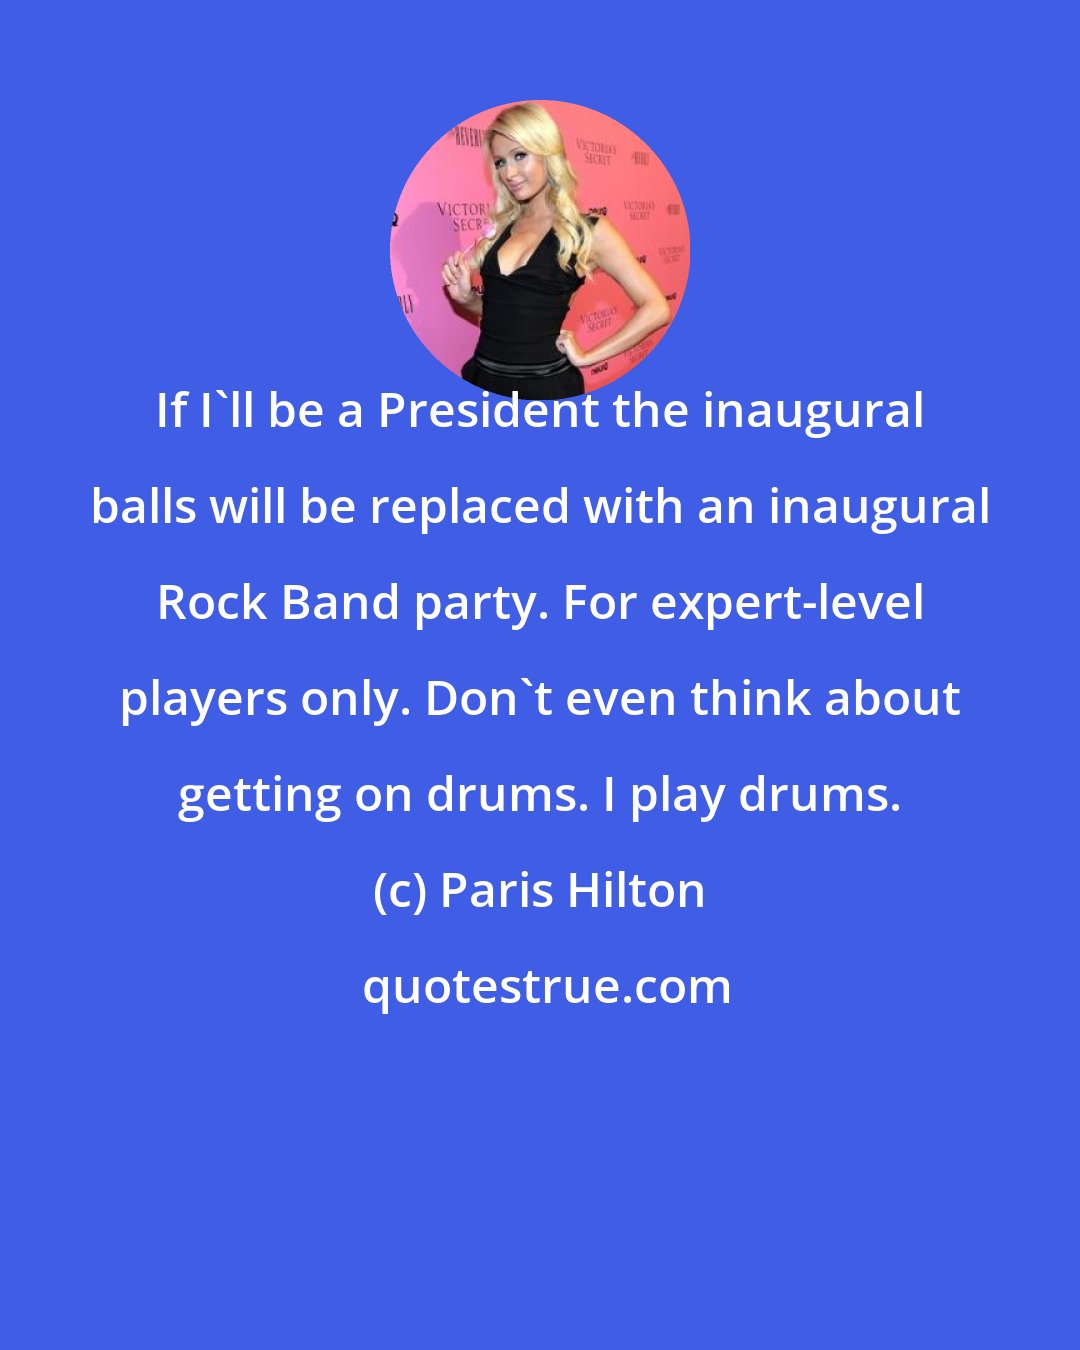 Paris Hilton: If I'll be a President the inaugural balls will be replaced with an inaugural Rock Band party. For expert-level players only. Don't even think about getting on drums. I play drums.